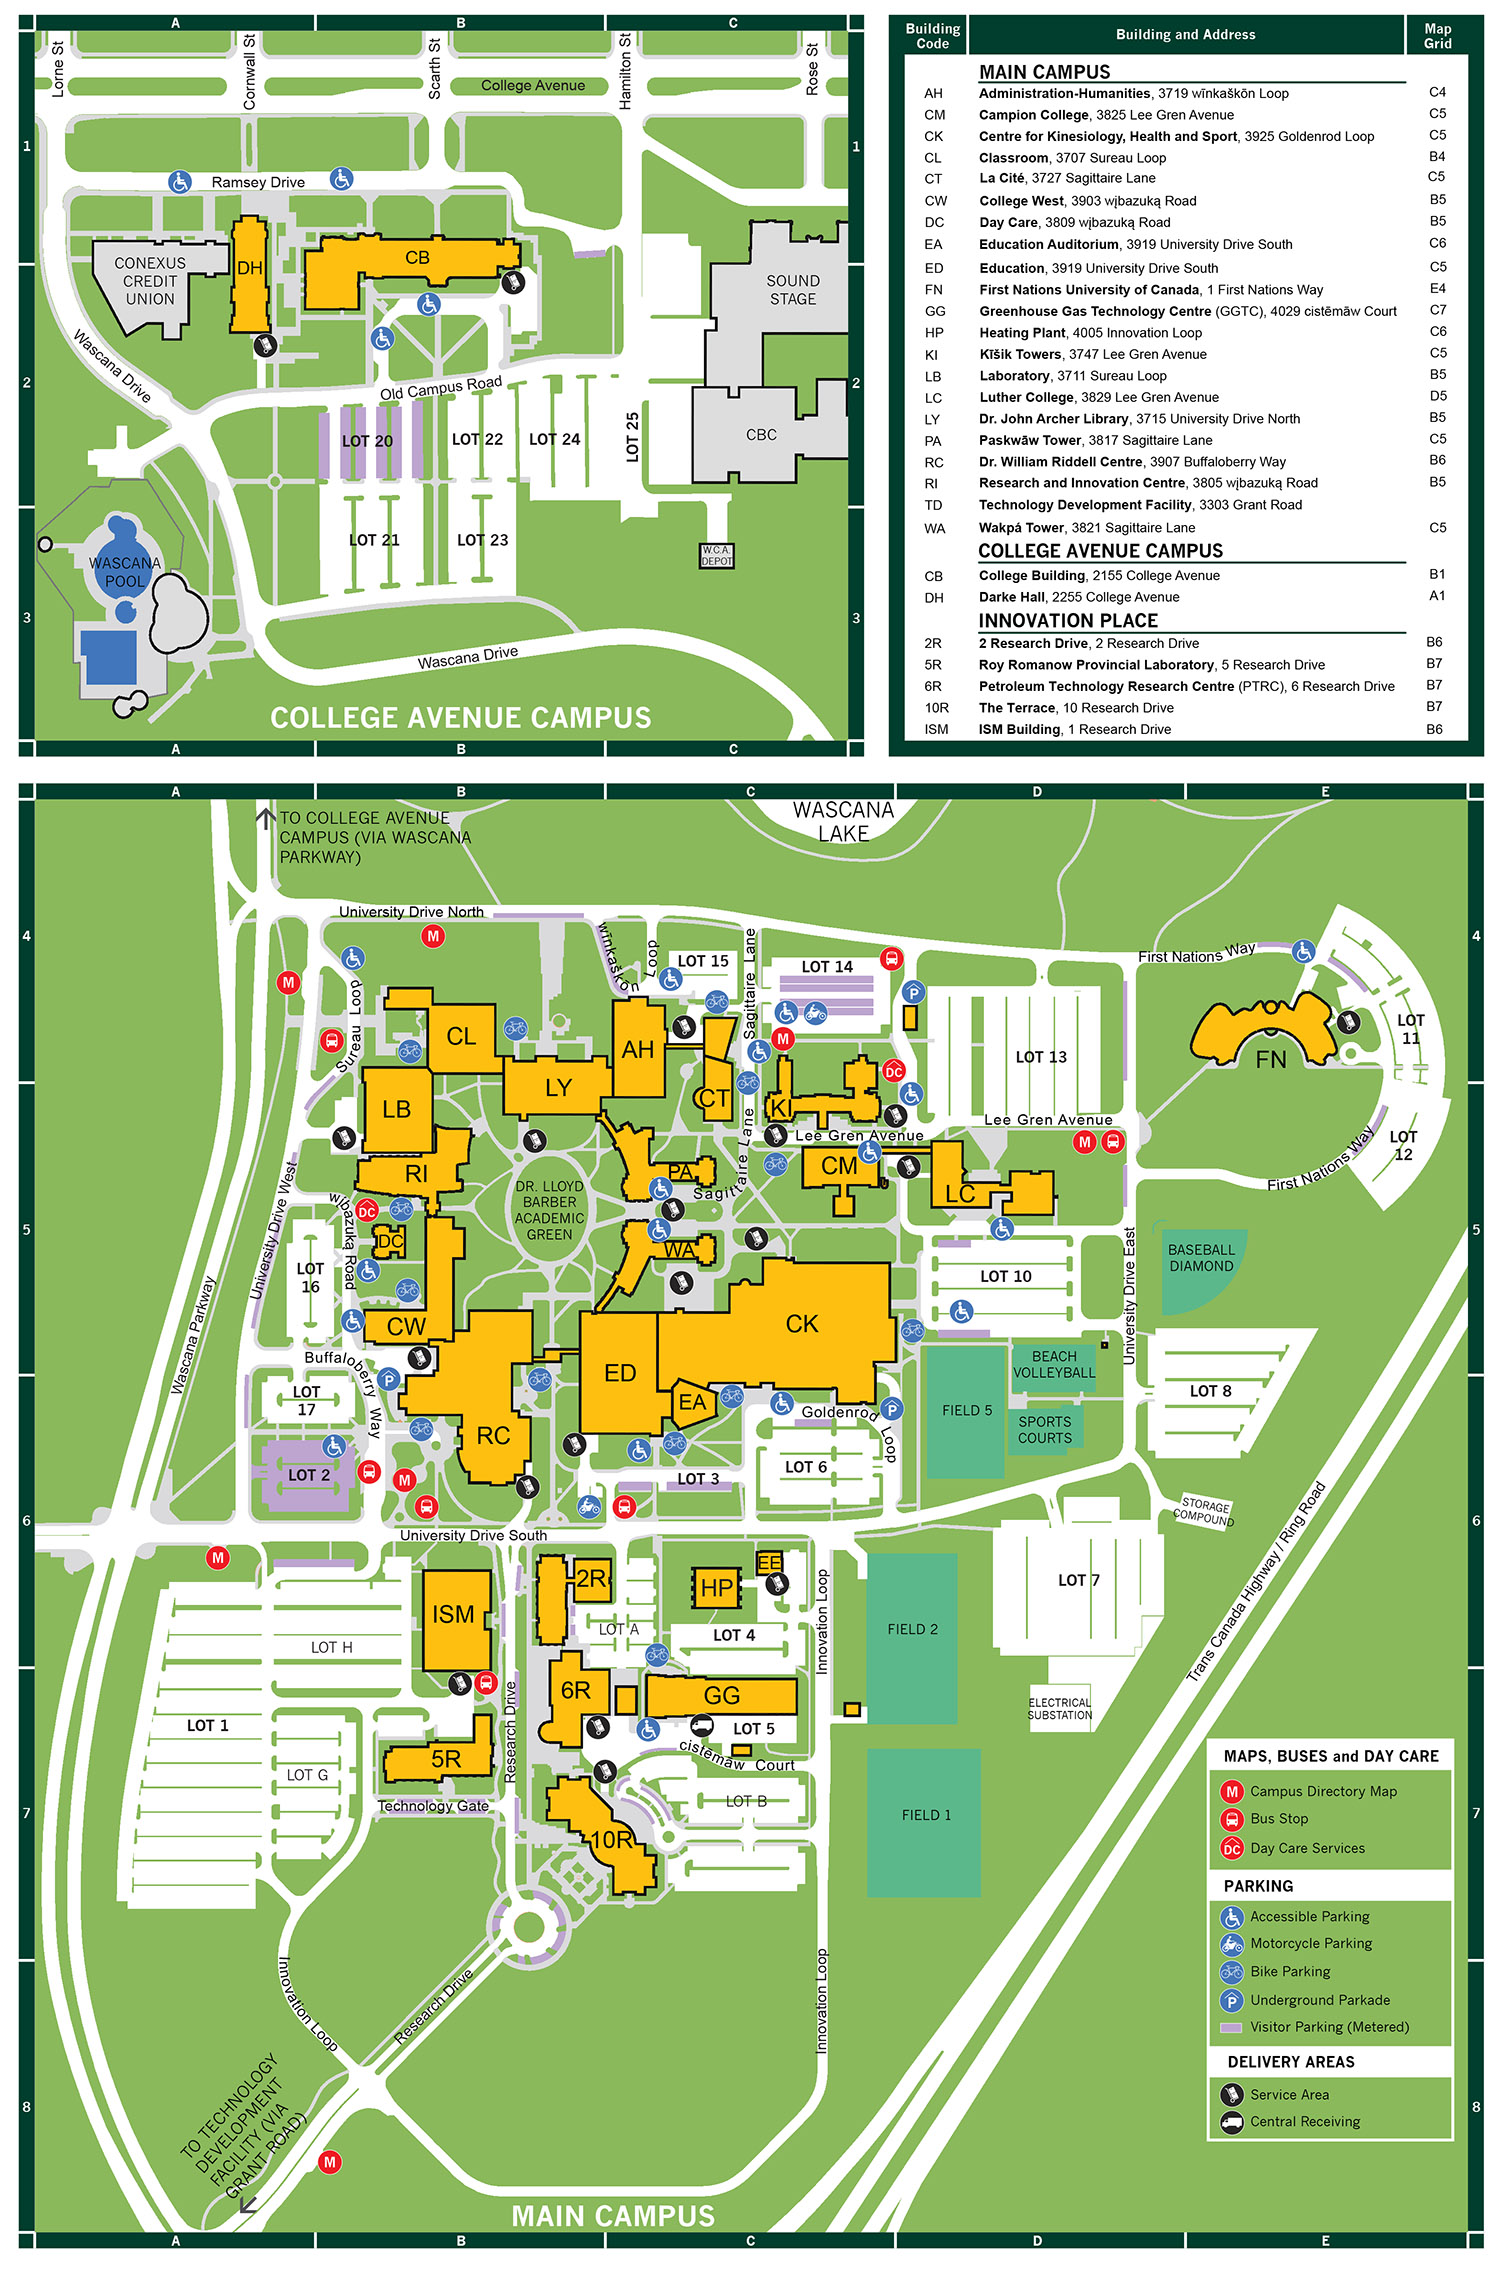 U Of R Map Campus Maps and Directions | Contact Us, University of Regina